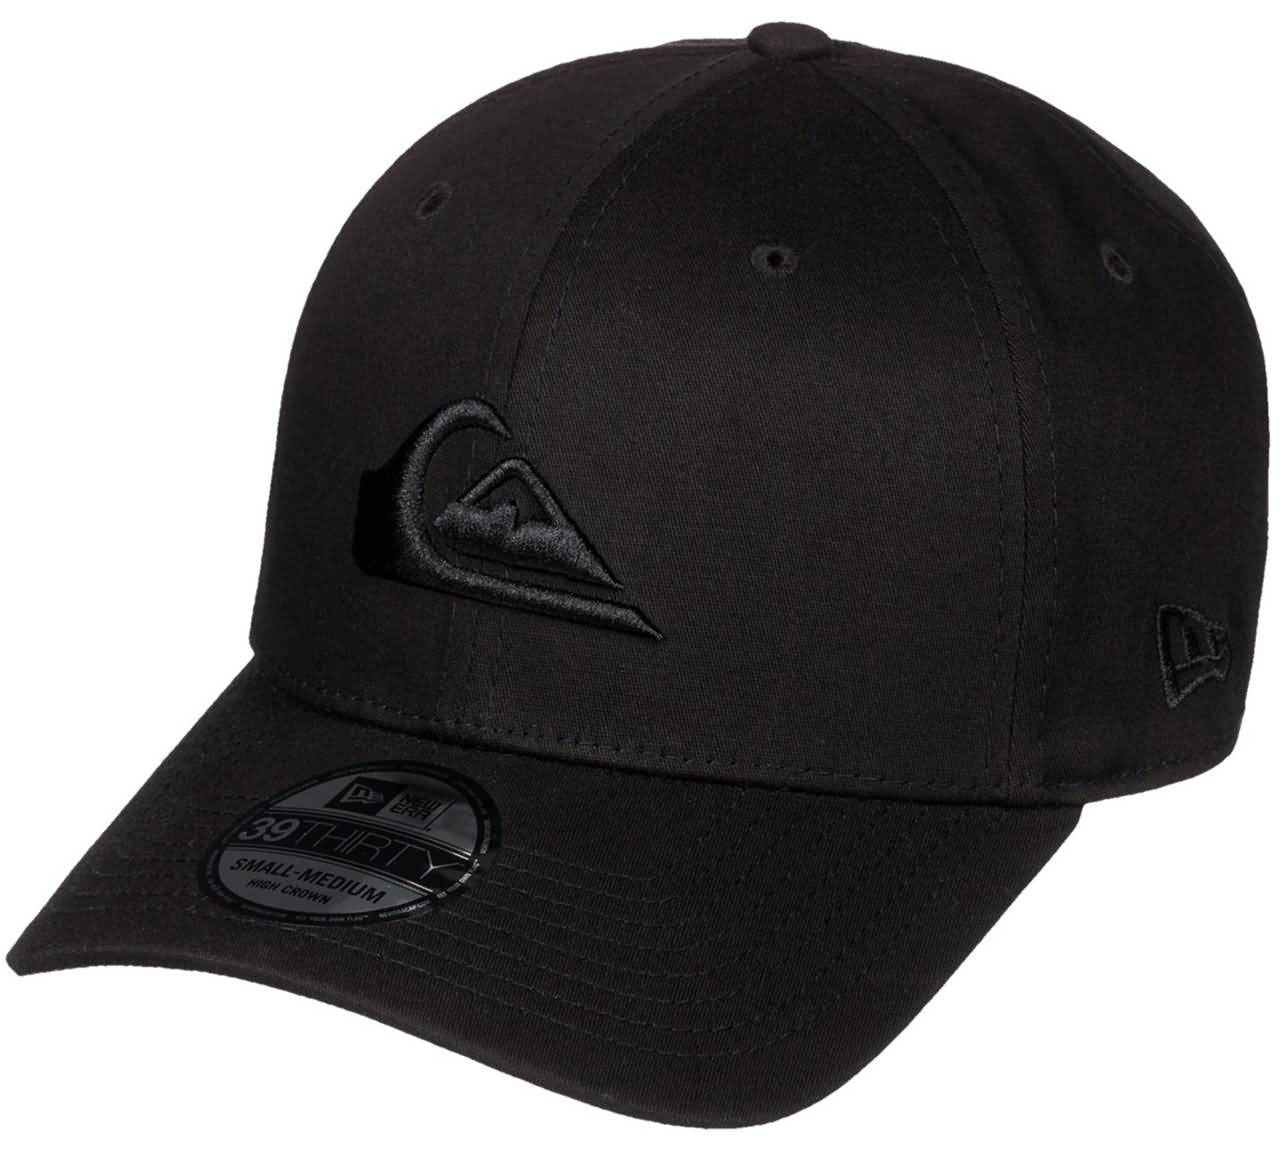 Quiksilver Fall Headwear OriginBoardshop – Accessories - 2017 Surf Skate/Surf/Sports Collection Hats Mens